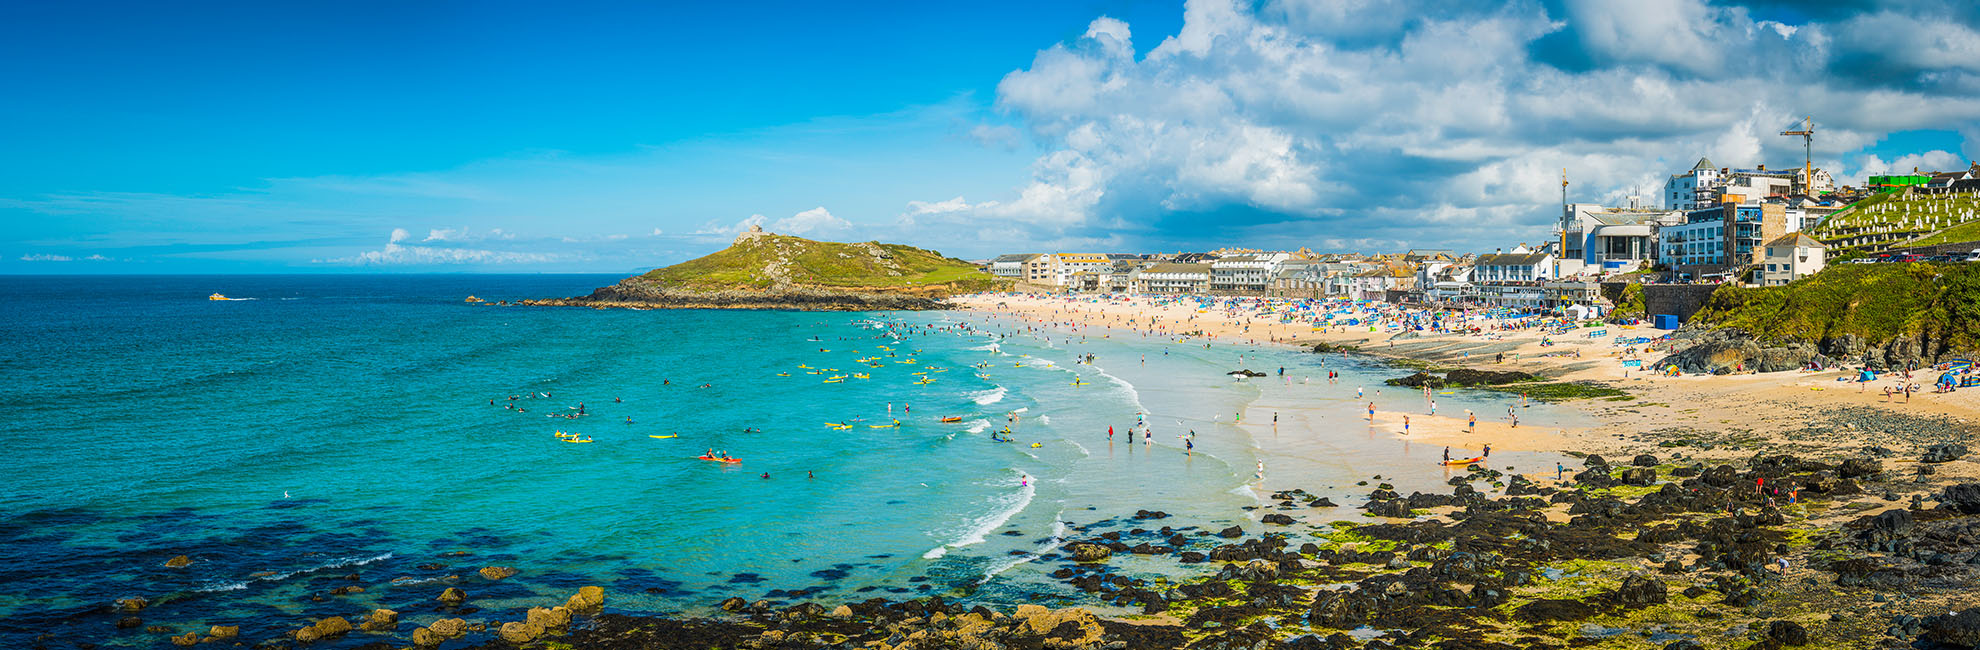 People swimming and relaxing on a sunny day at St Ives Beach in Cornwall